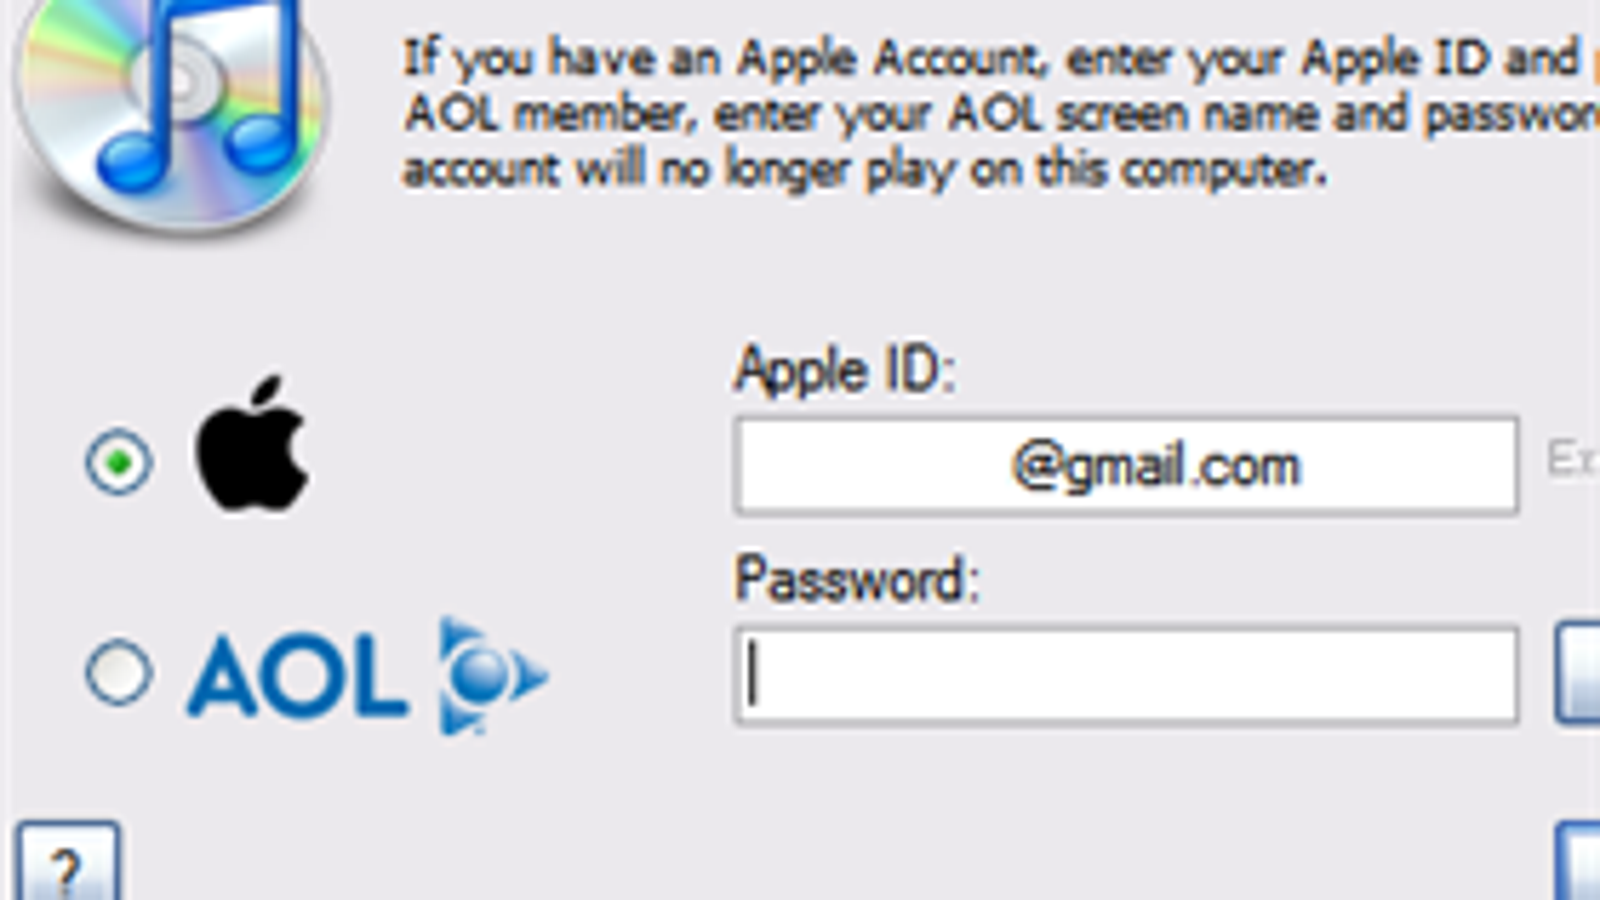 how to authorize a computer on new itunes